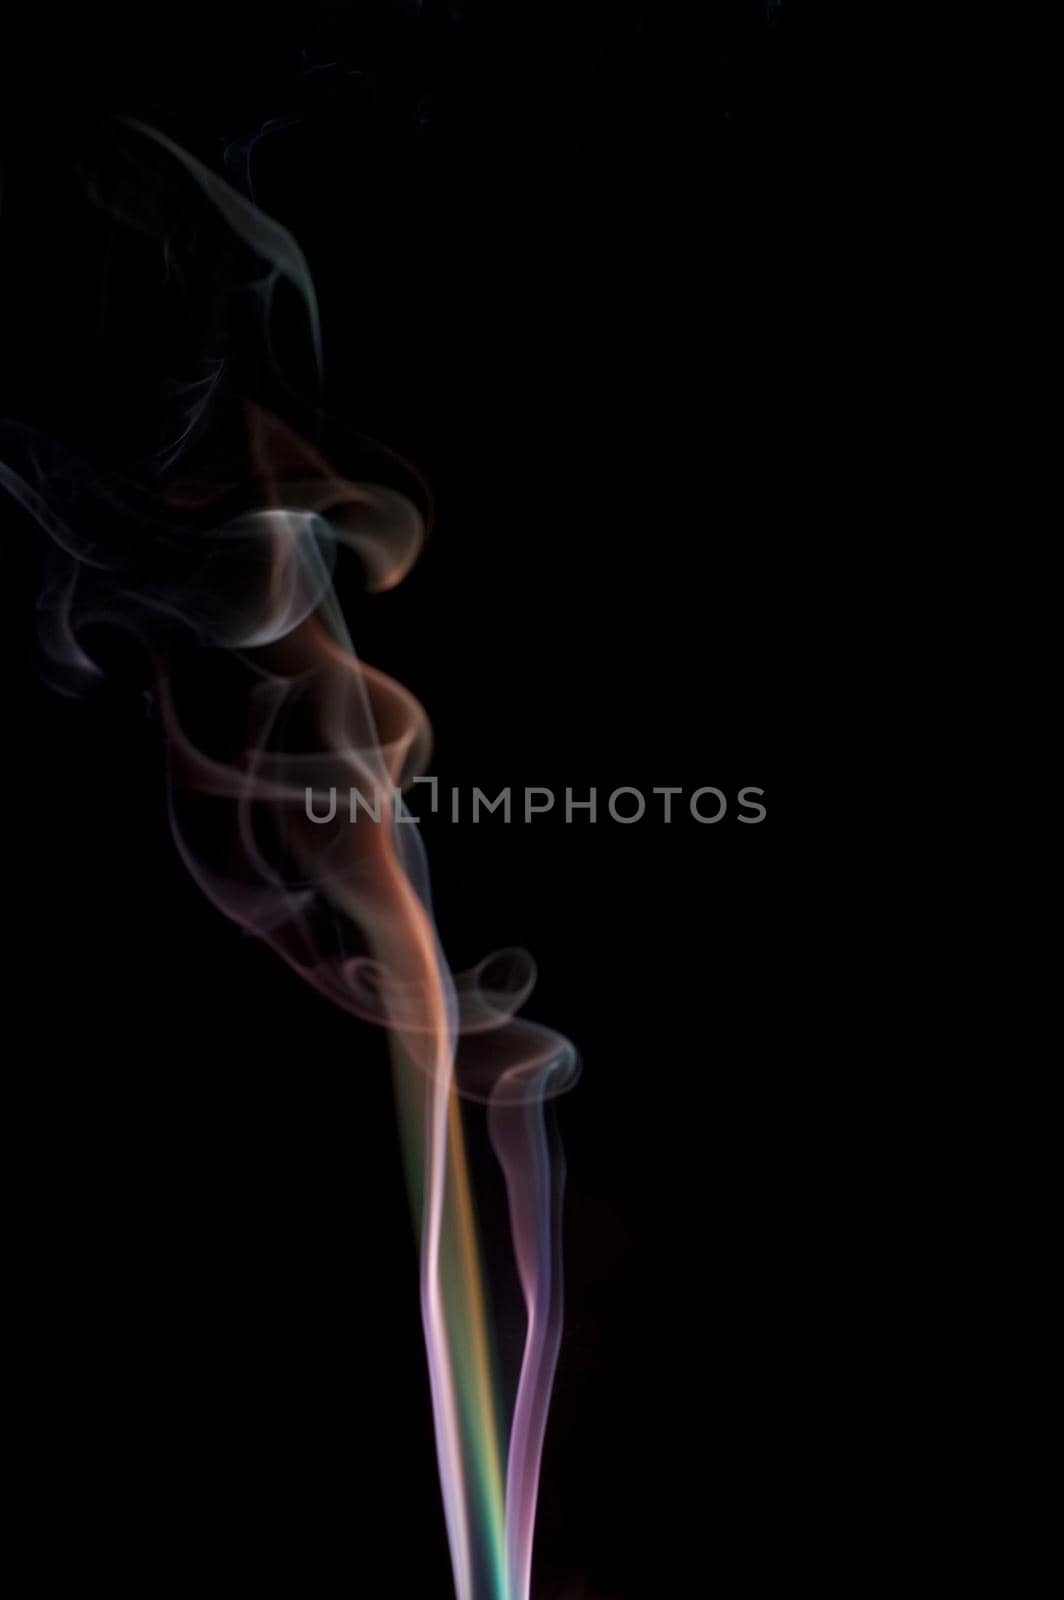 a plume of colorful swirling smoke trails